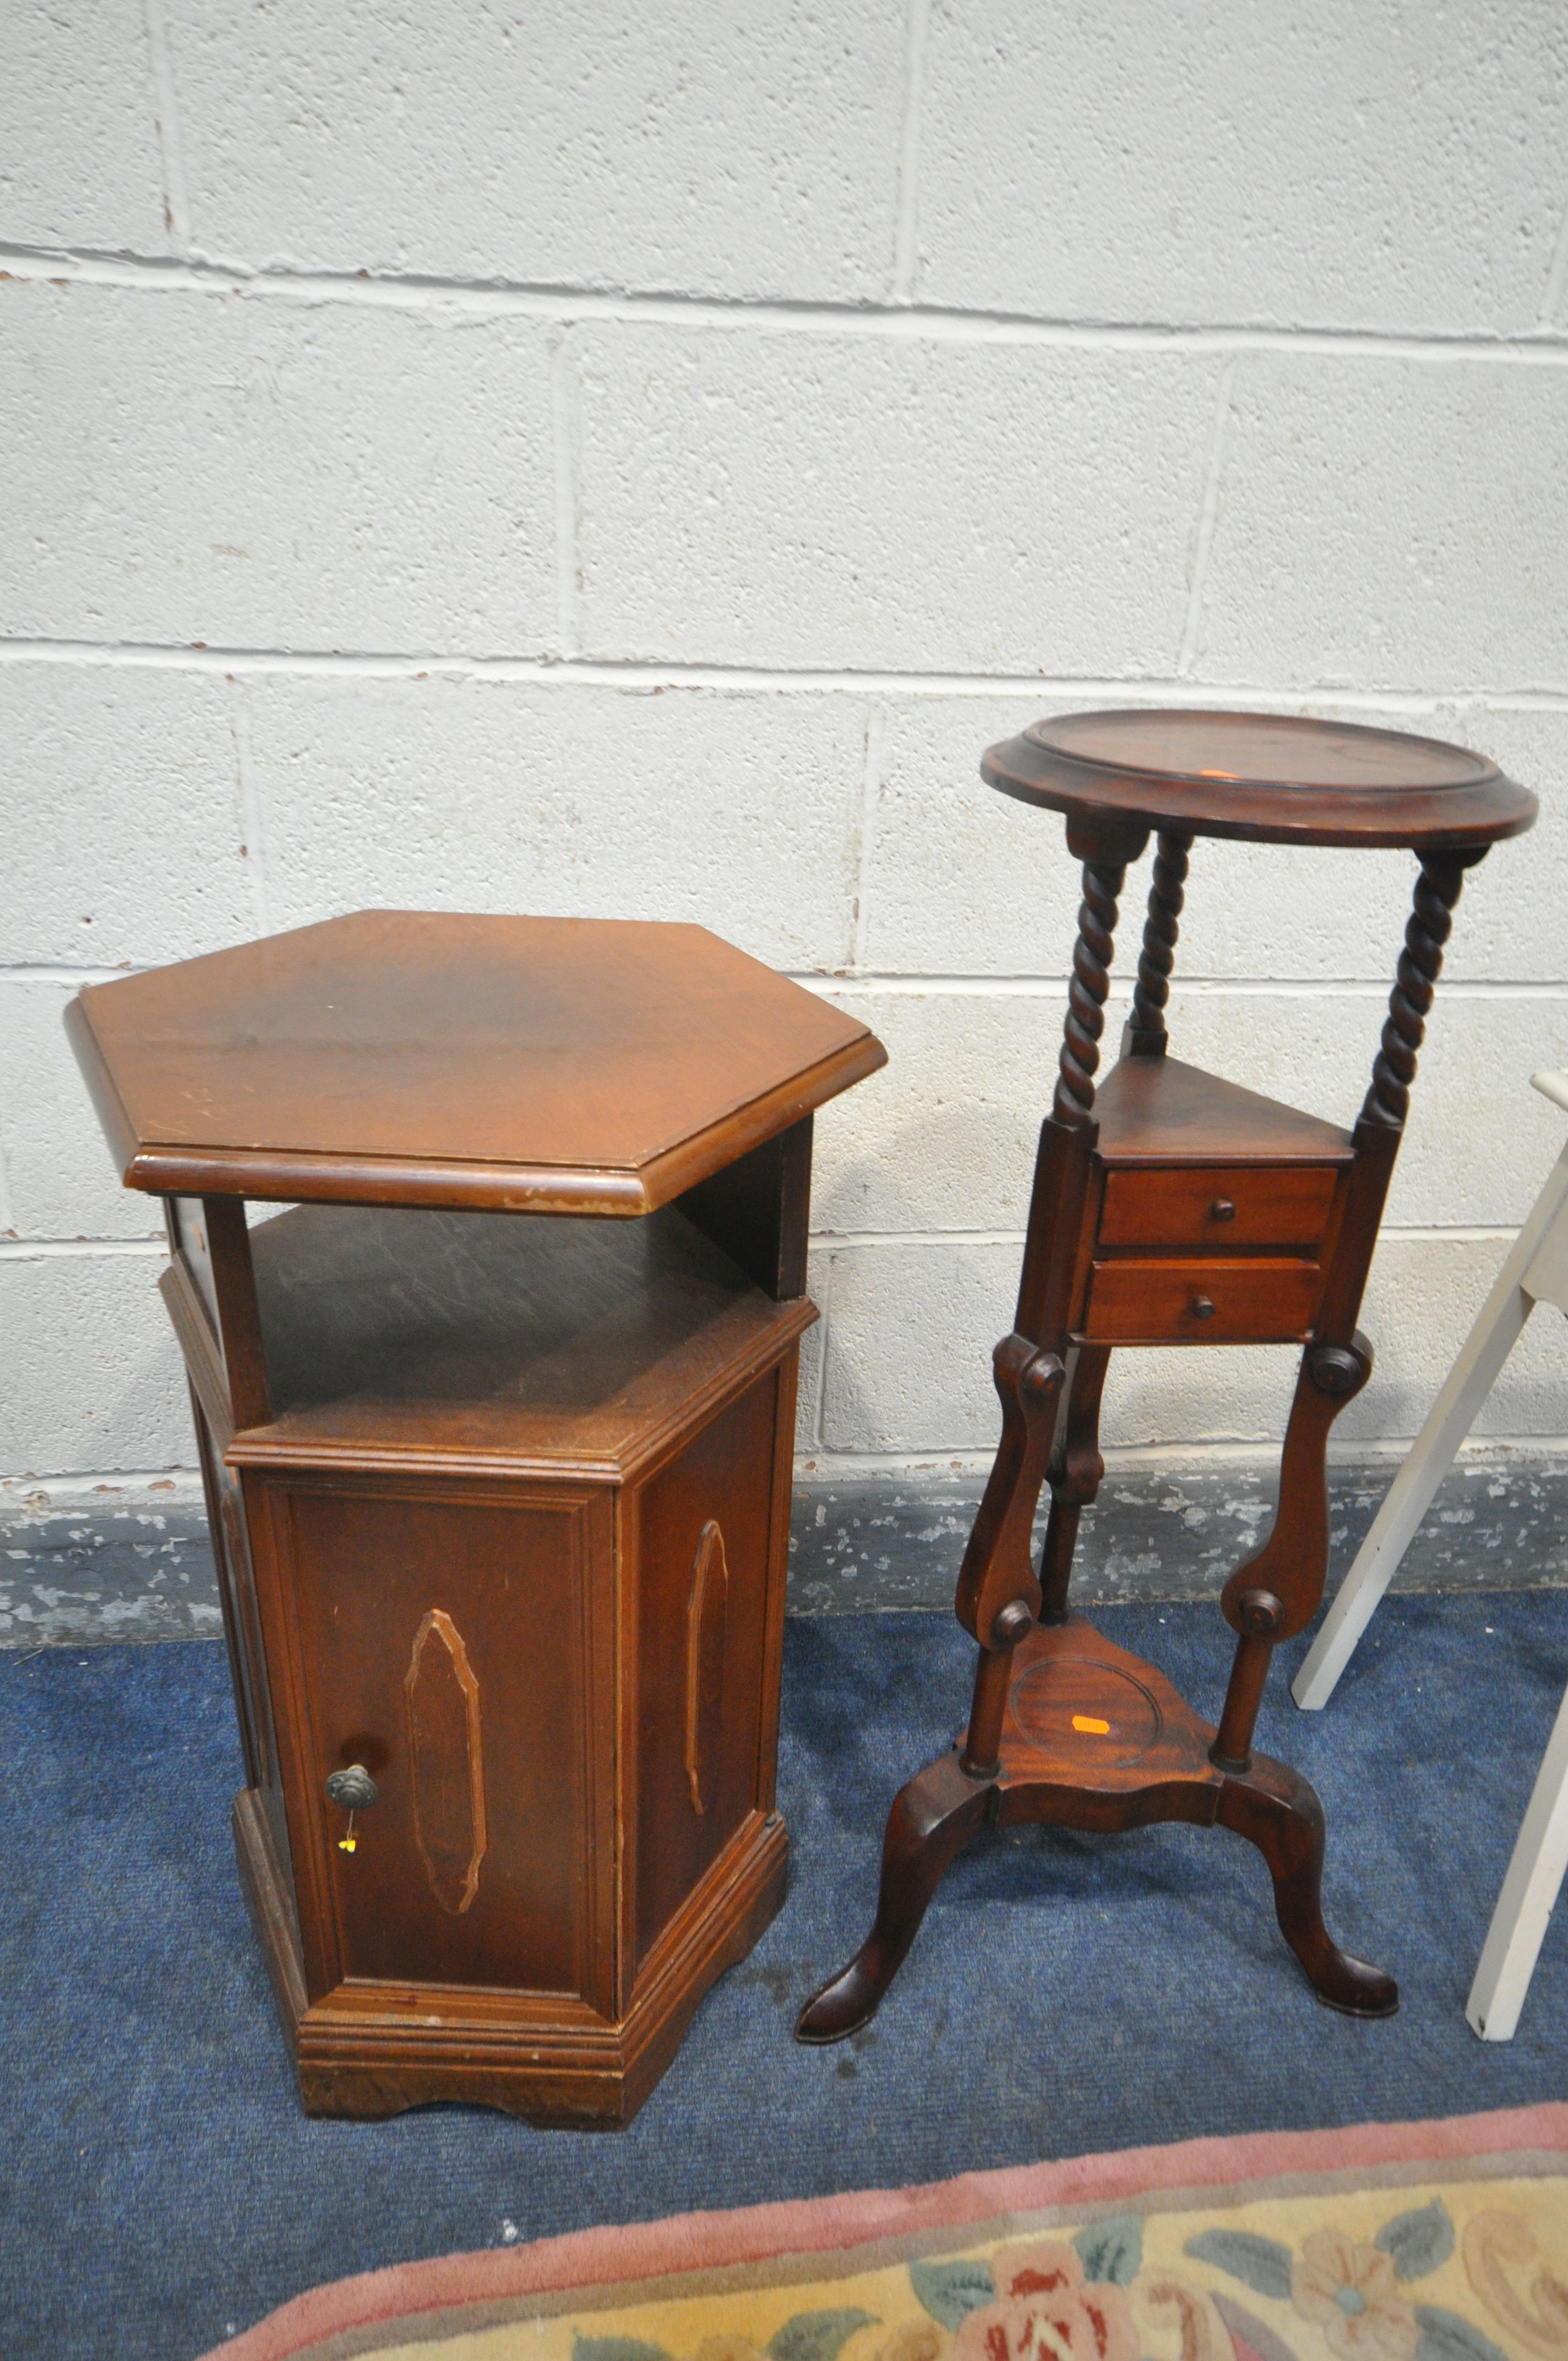 A MAHOGANY WIG STAND, with two drawers, height 86cm, a hexagonal side cabinet, a painted torcher, - Image 2 of 2